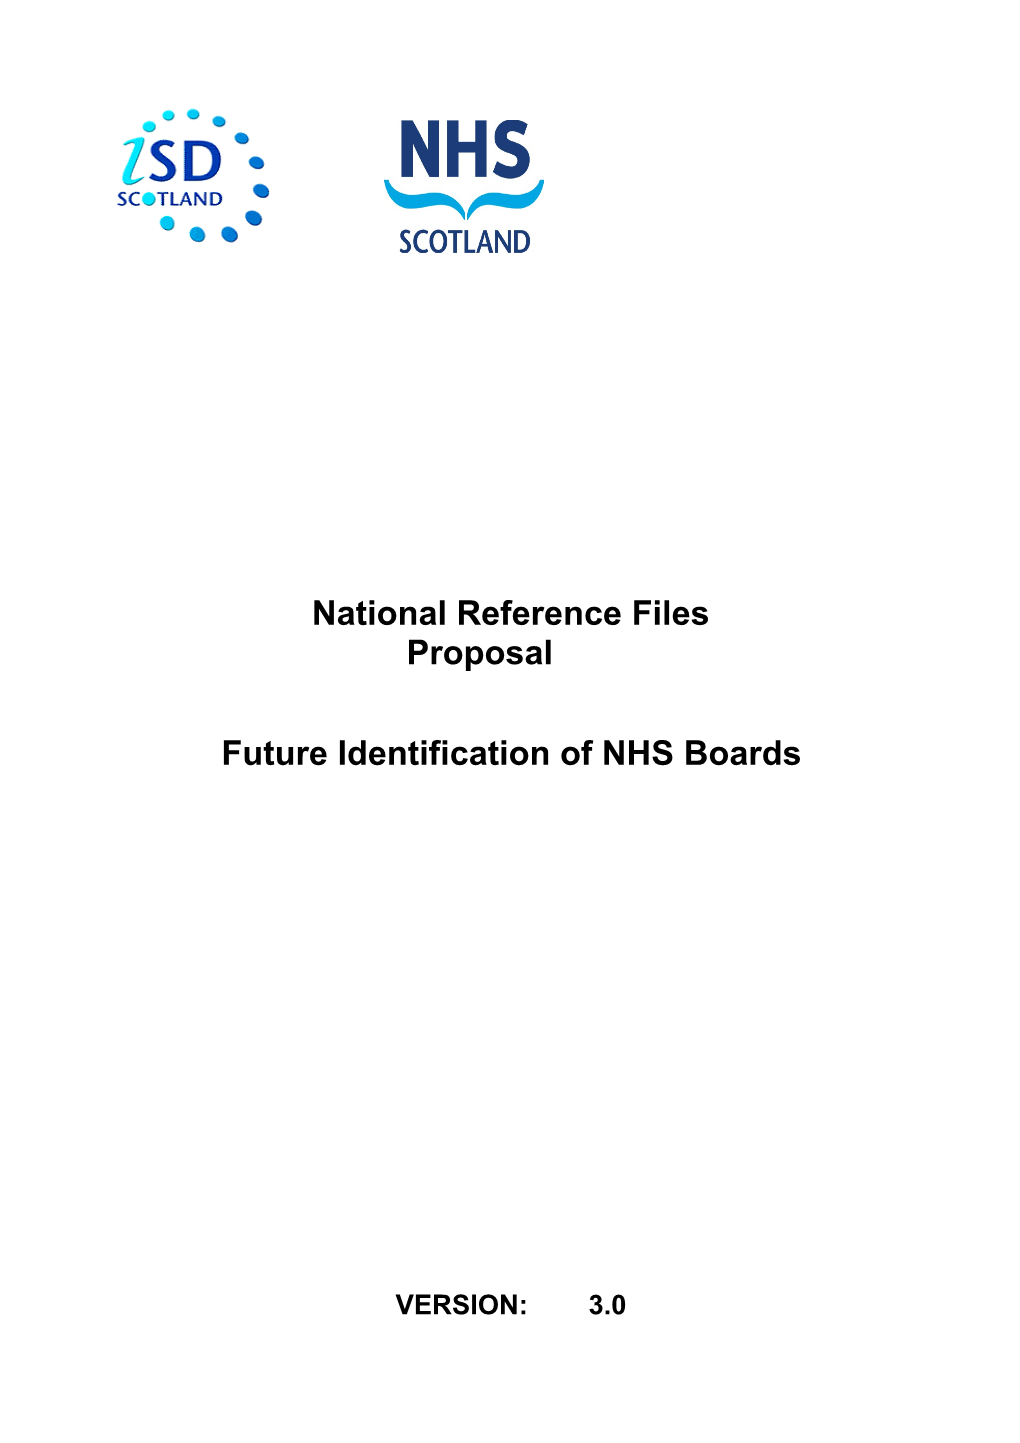 Proposal for Future Identification of NHS Boardsv3.0